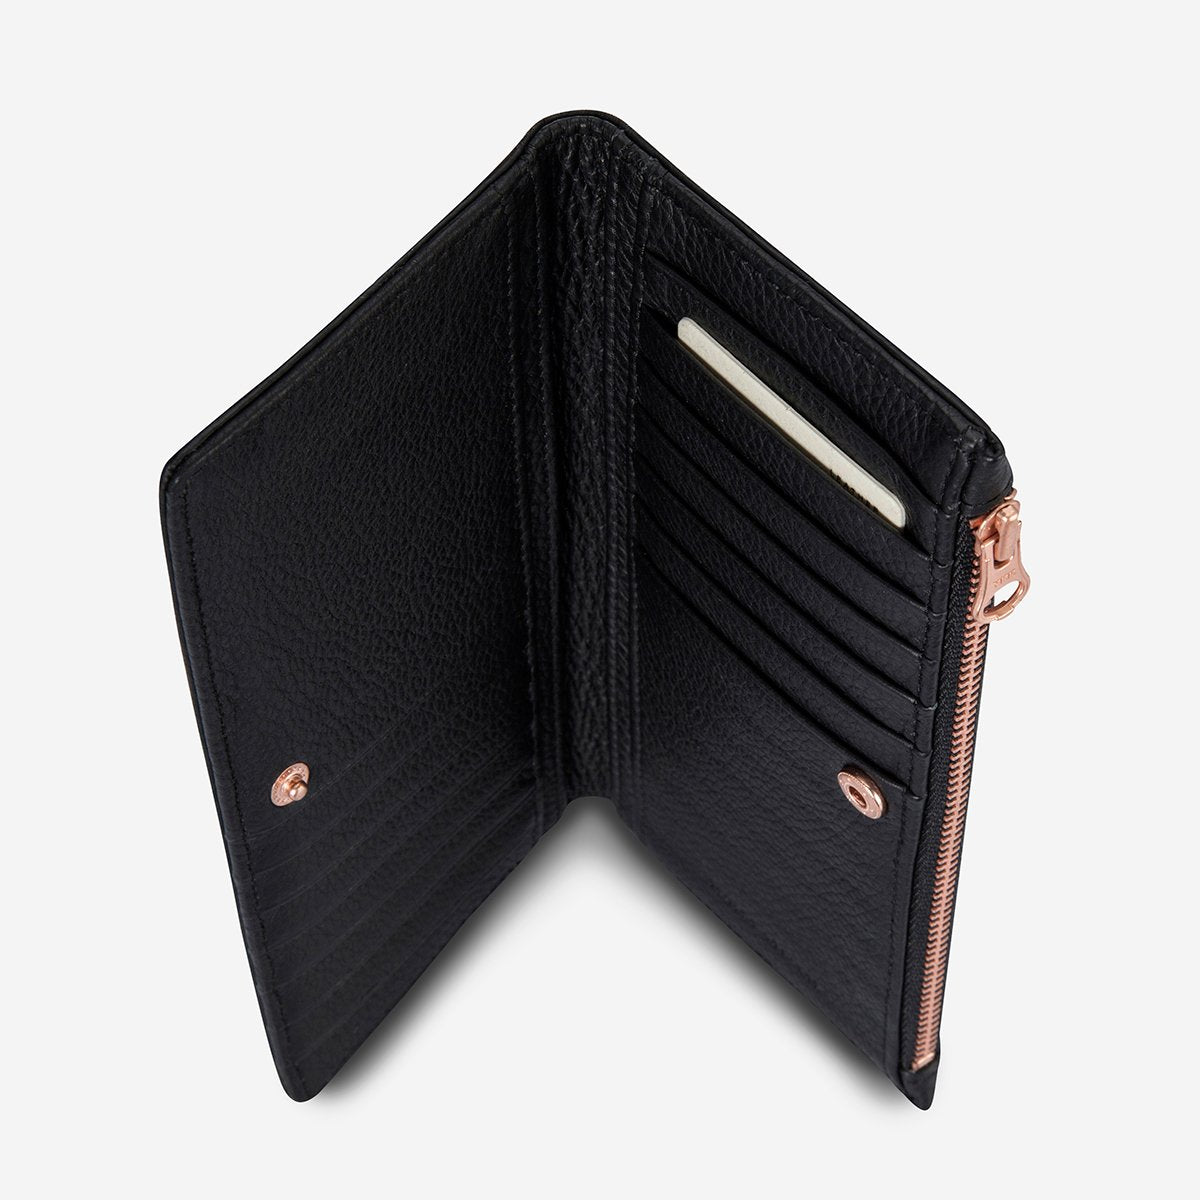 Status Anxiety In the Beginning Wallet - Multiple colours